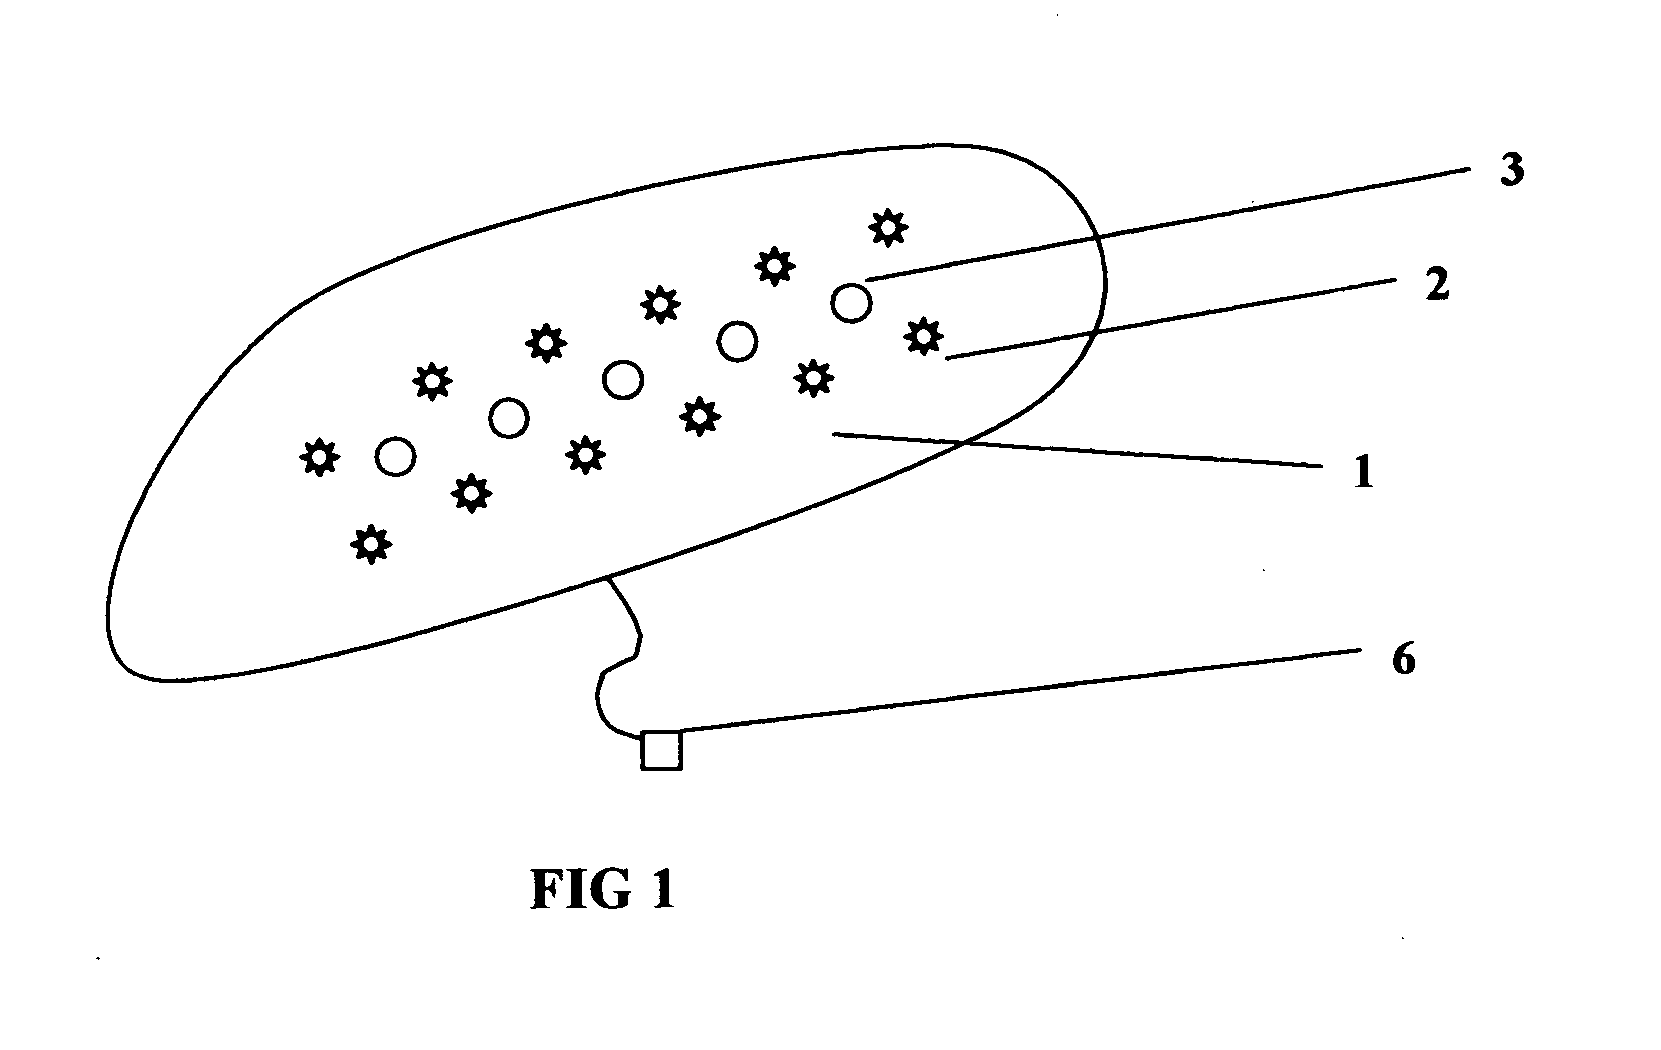 Acoustic-optical therapeutical devices and methods